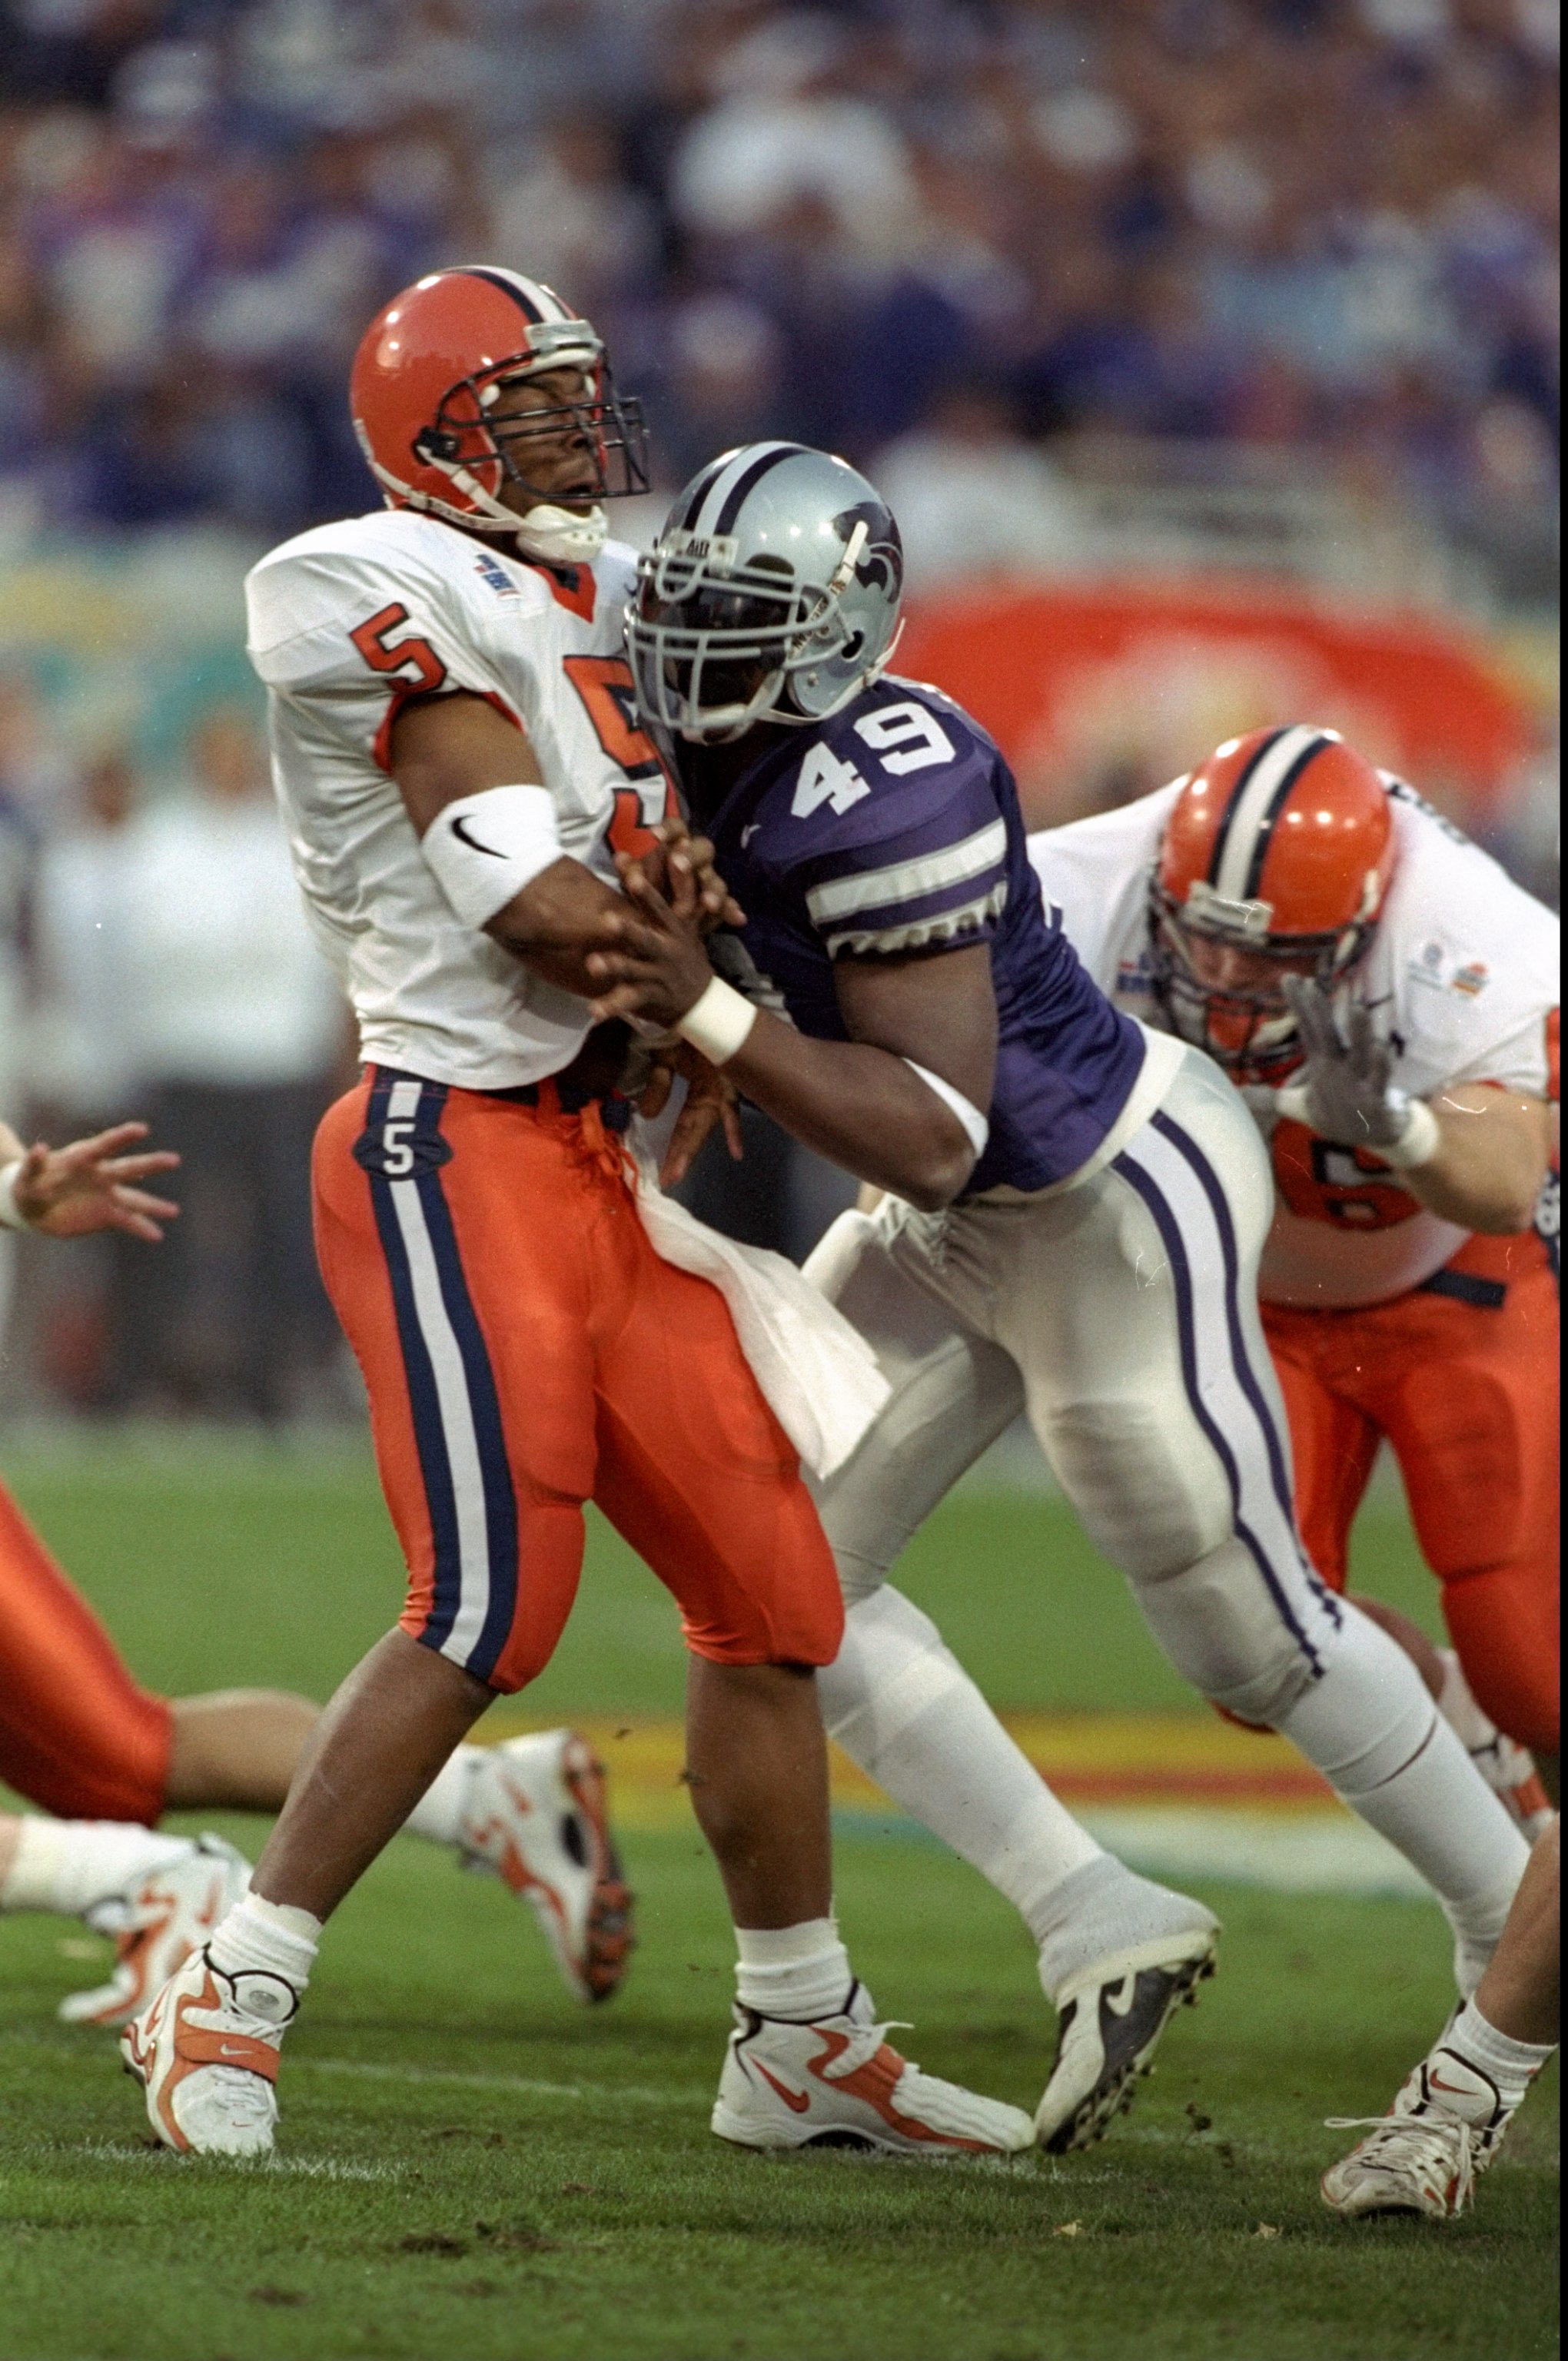 I couldn't find any pictures of a K-State running back wearing No. 49, so here's a delightful throwback picture of Darren Howard sacking Donovan McNabb instead. Made your day, didn't it?